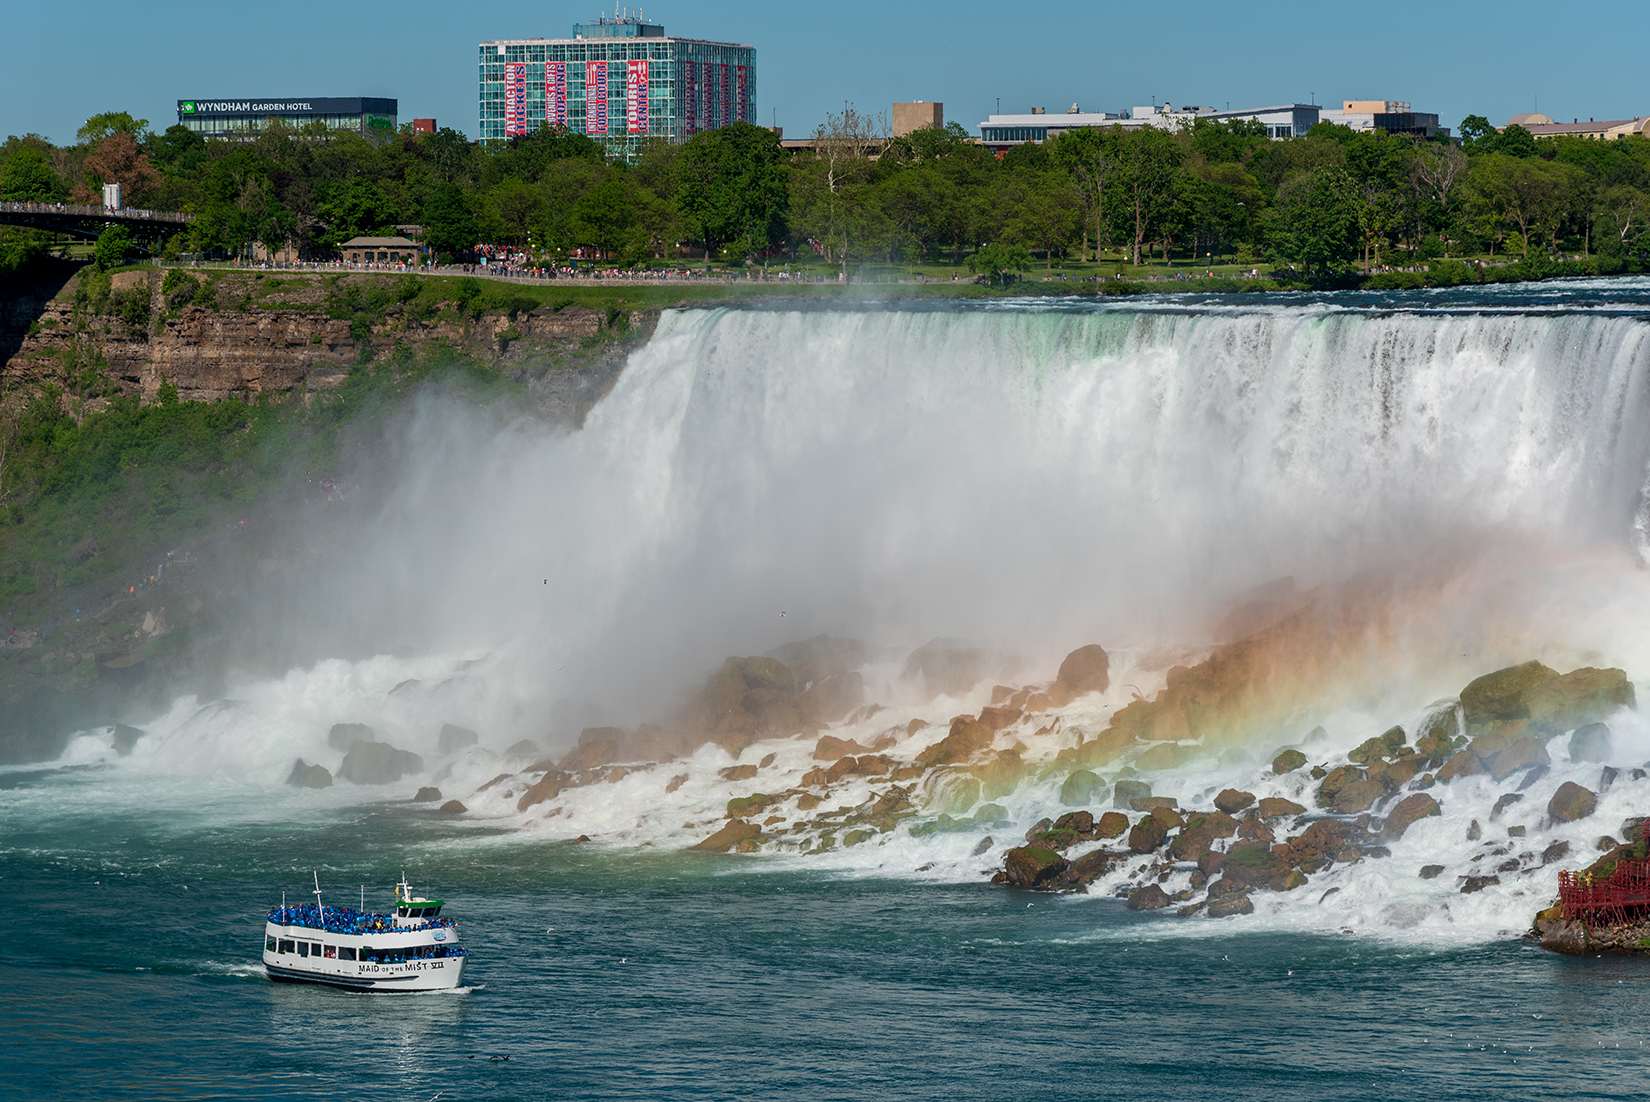 'Maid of the Mist' cruise boat passing the American Falls